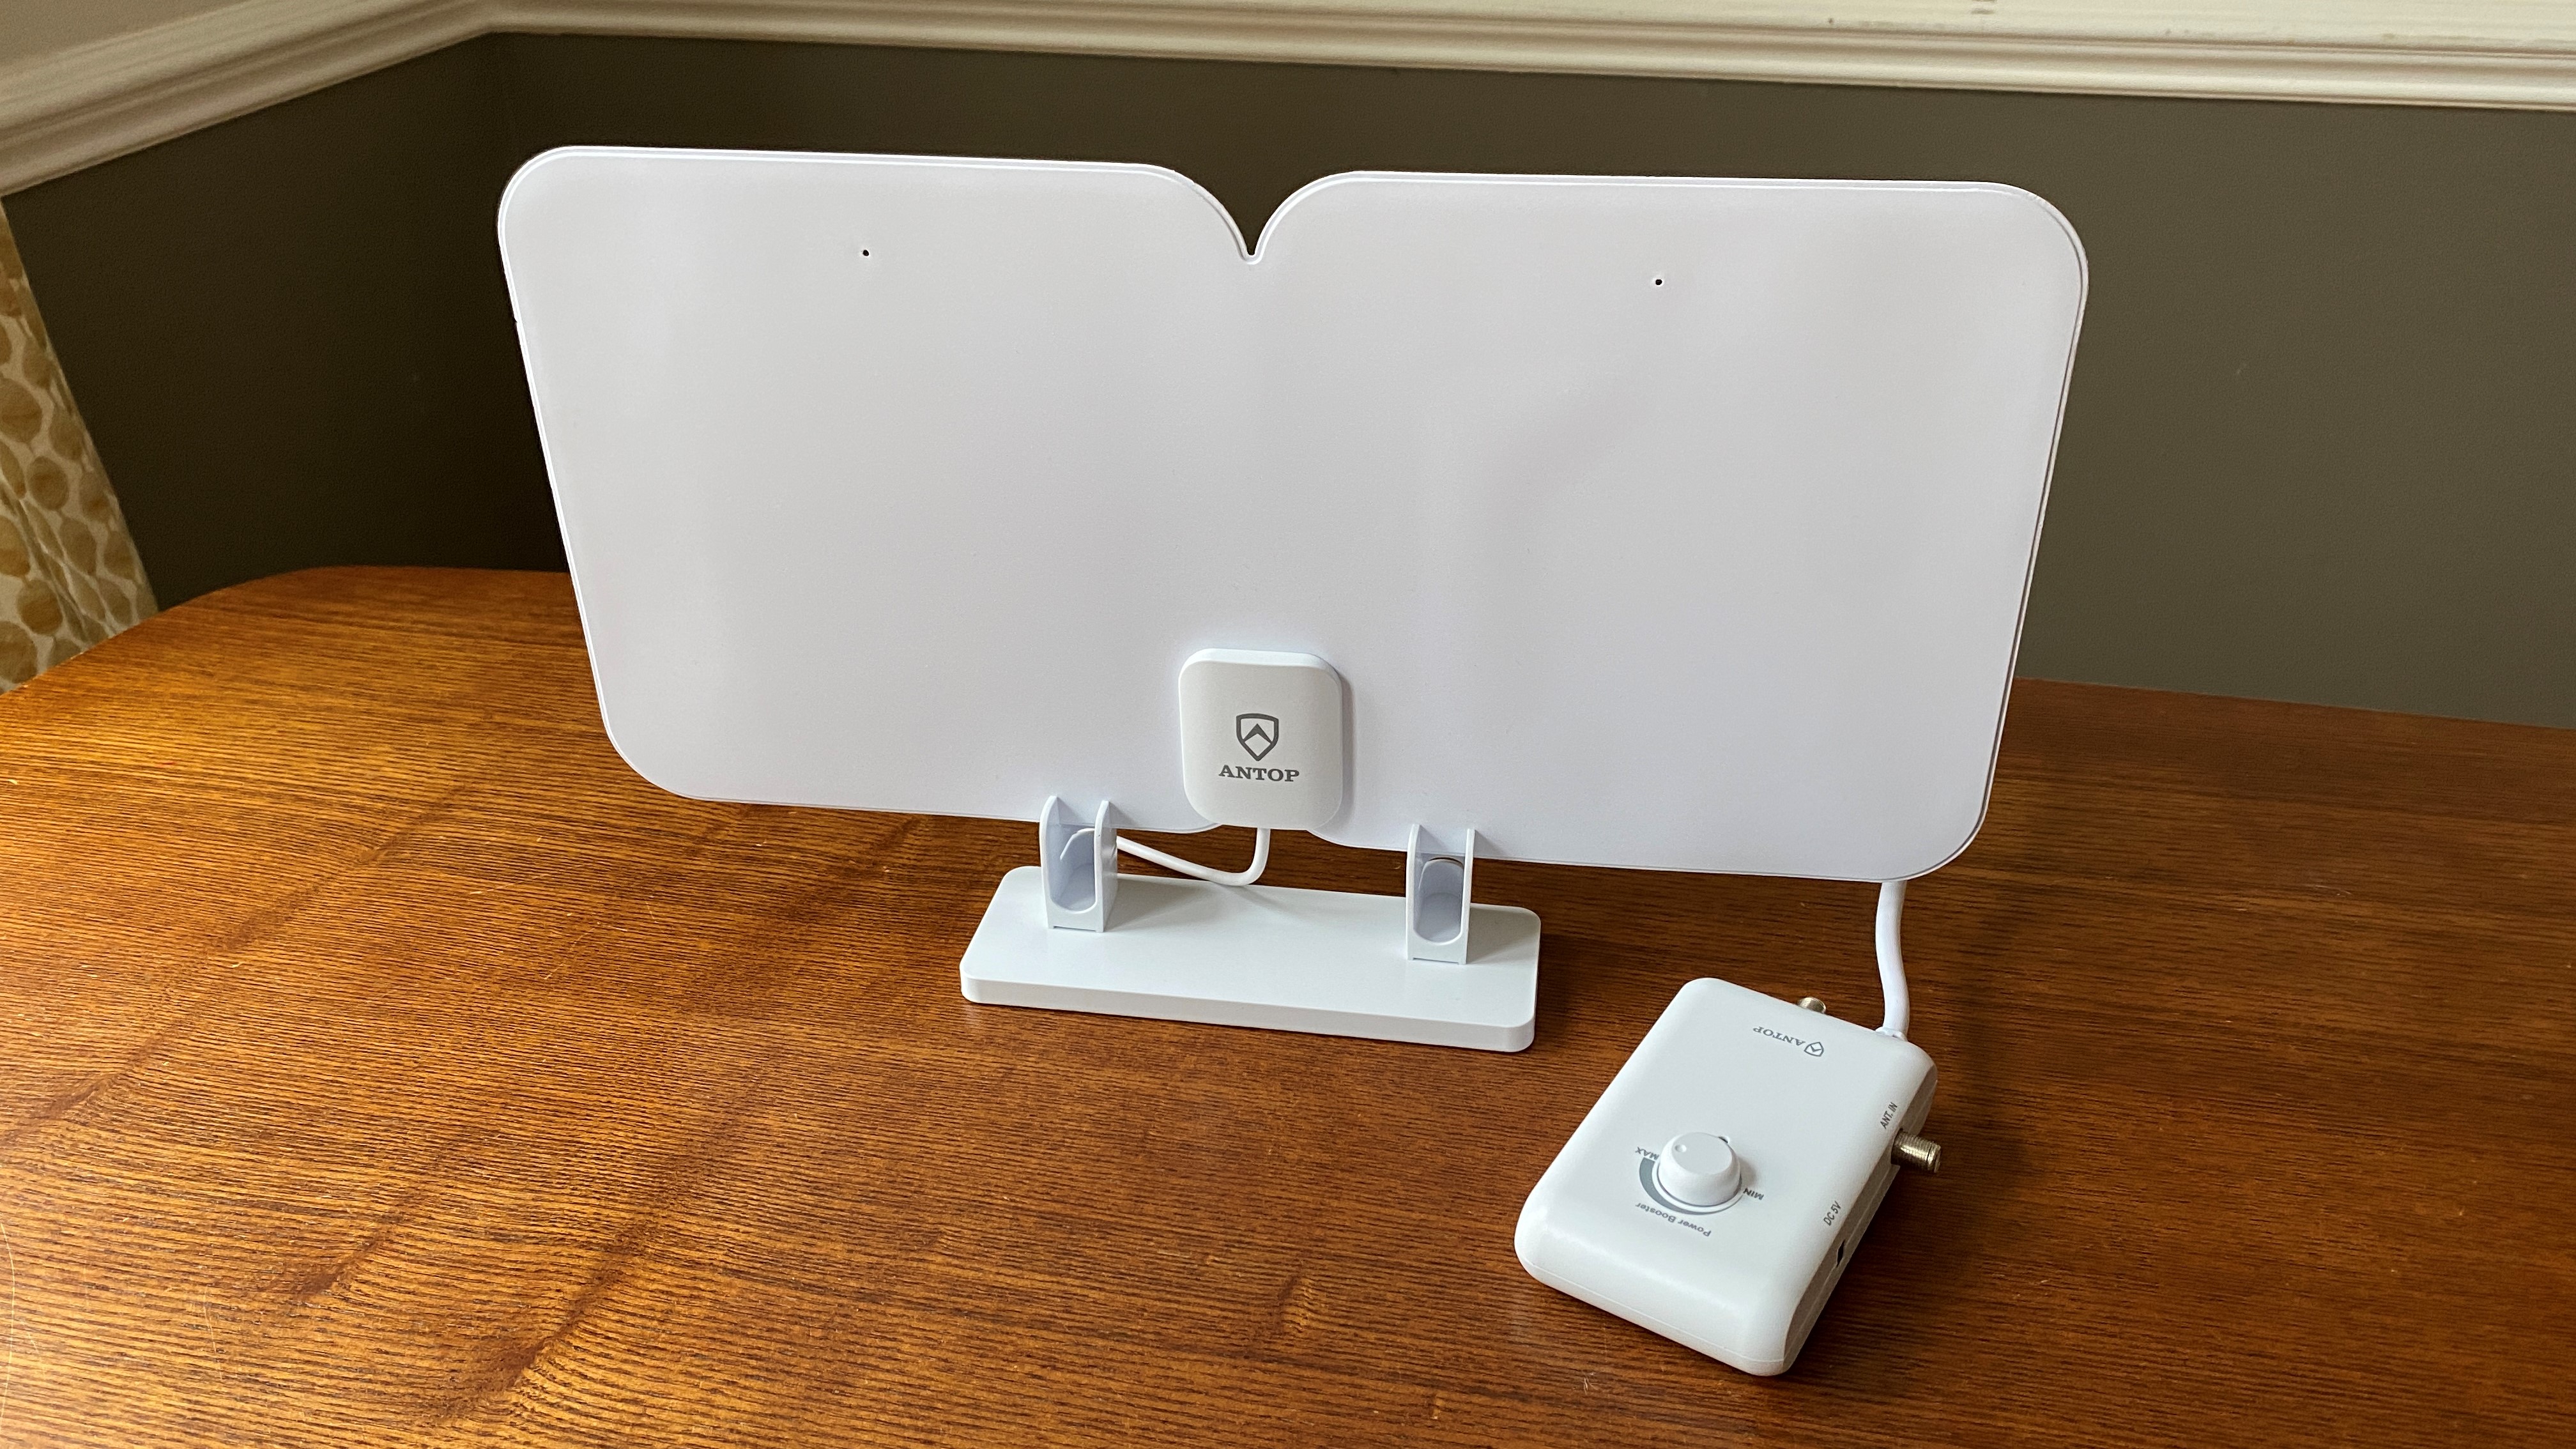 Antop HD Smart Antenna SBS-301 placed on a wooden table